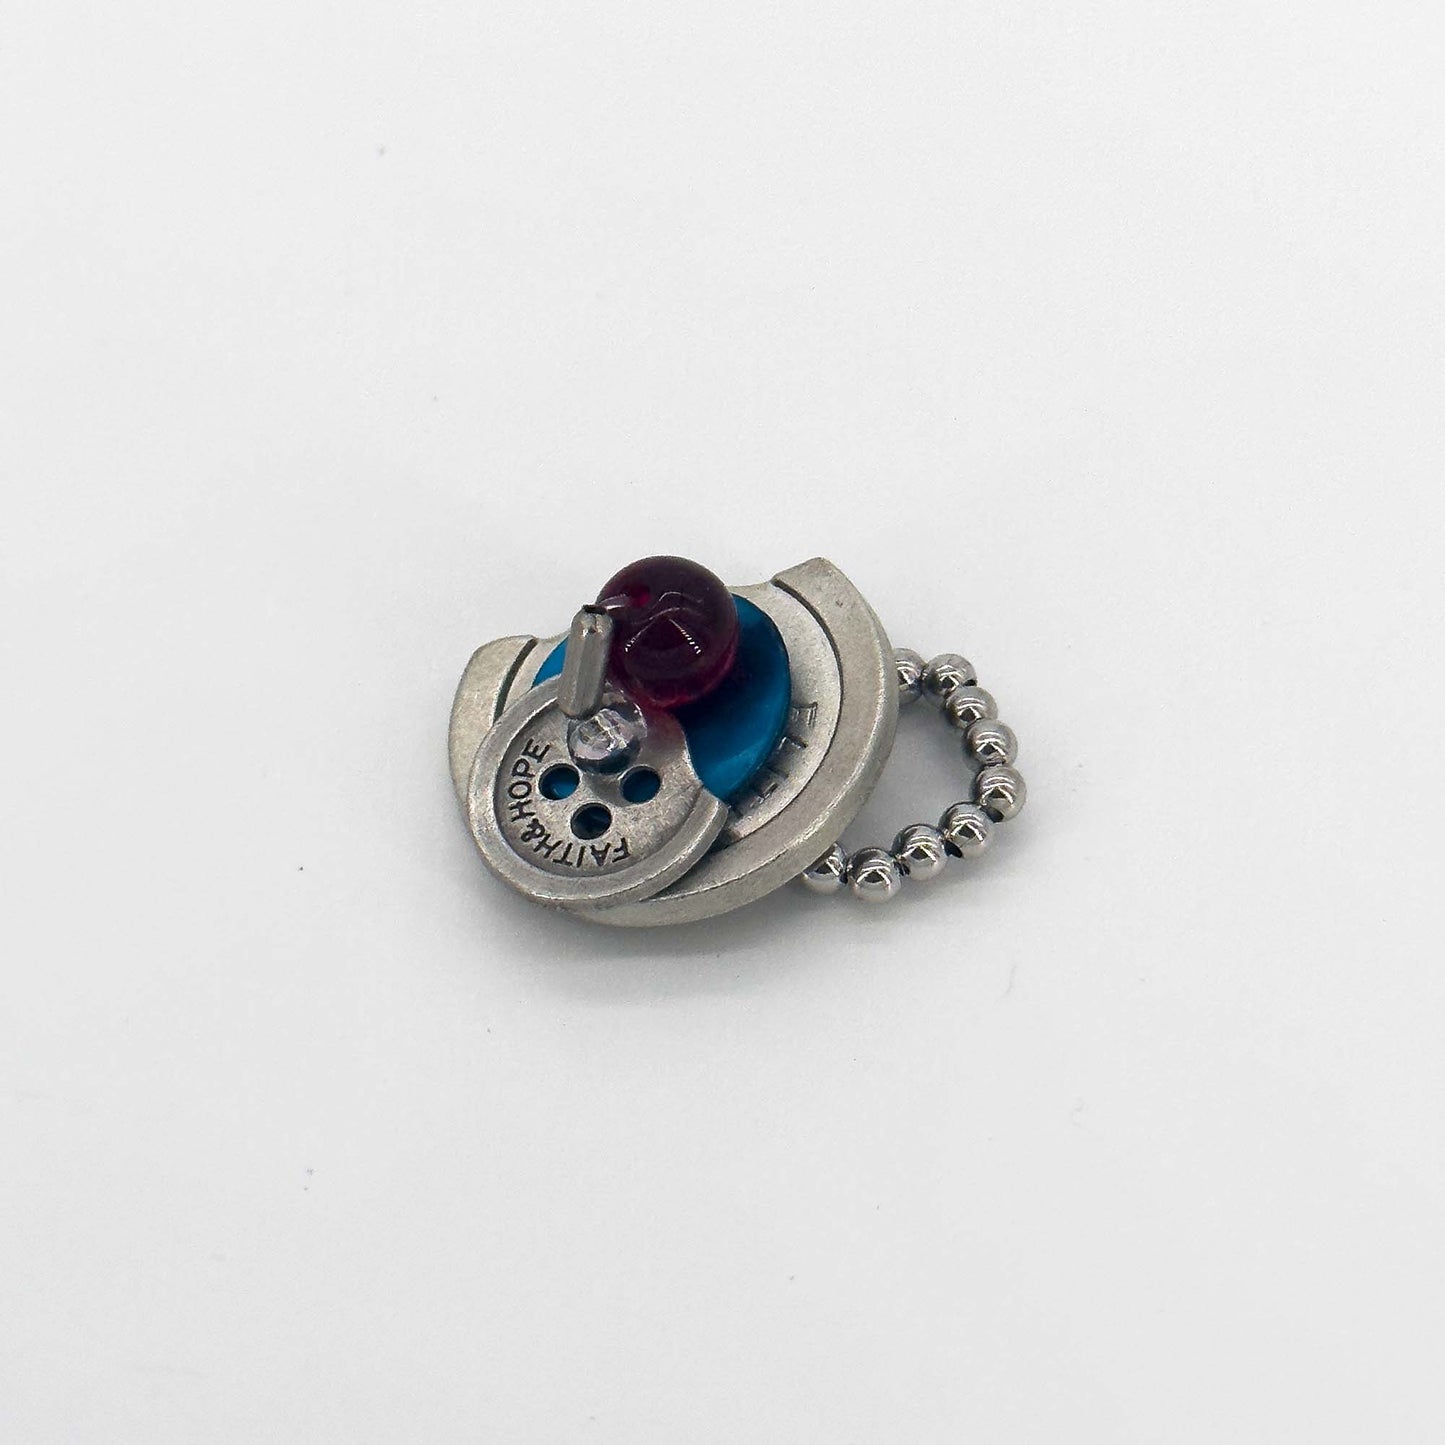 Side view of a handmade ring with button elements made of seashell, colored glaze